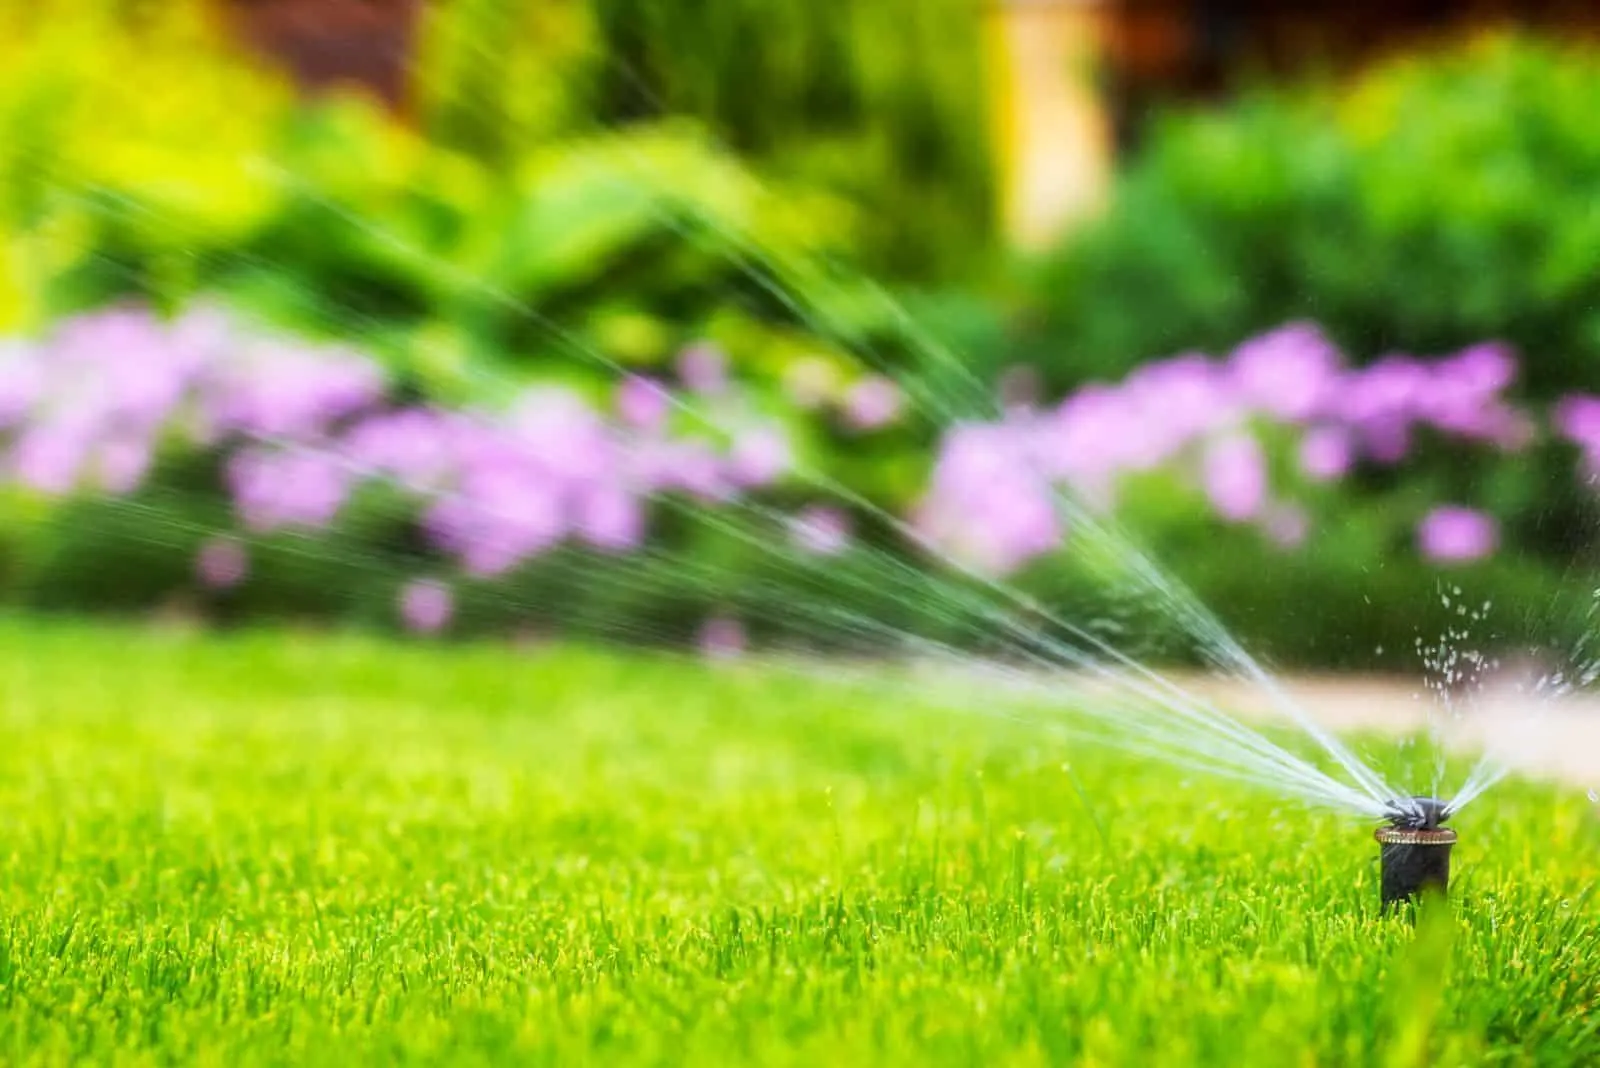 spraying the lawn with water